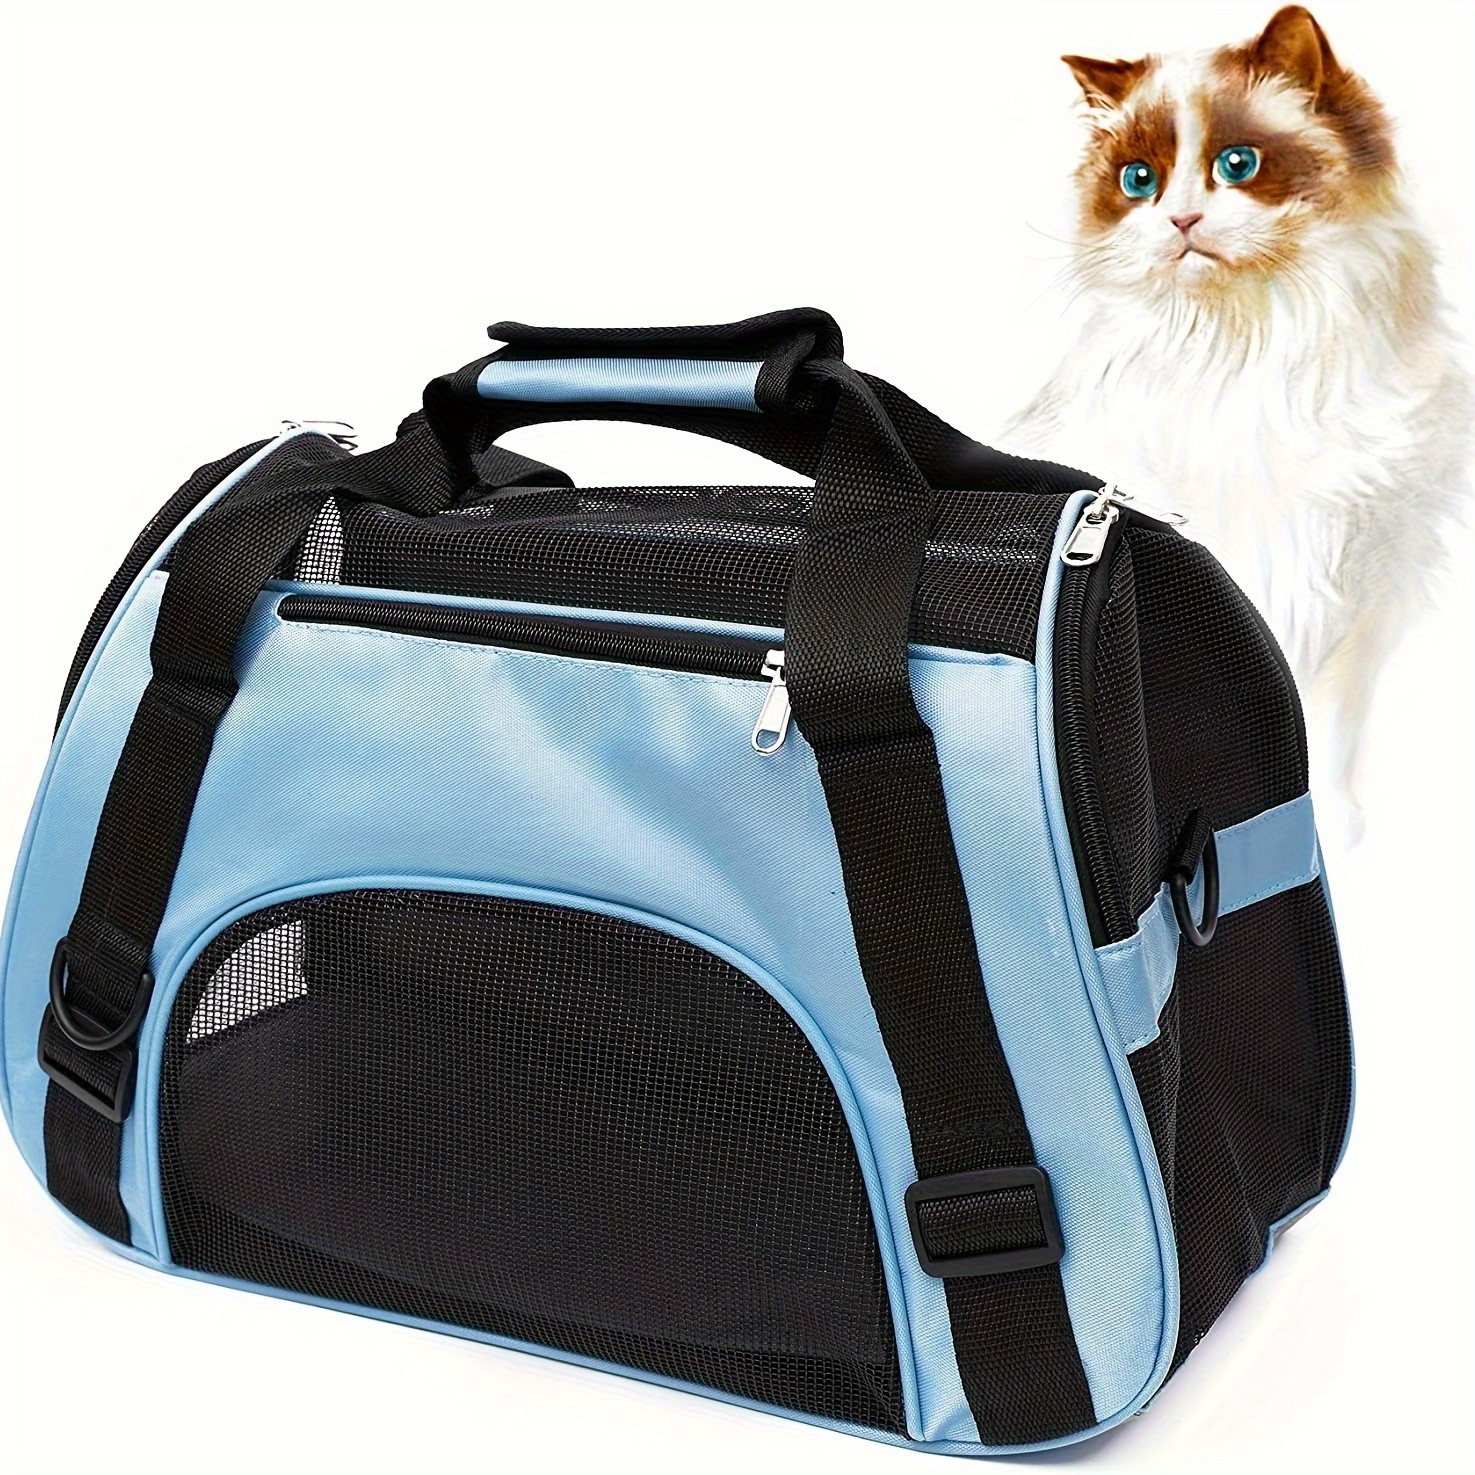 

Portable Pet Carrier For Cats And Dogs - Airline Approved, Foldable And Convenient Handbag, Ideal For Travel And Outdoor Activities